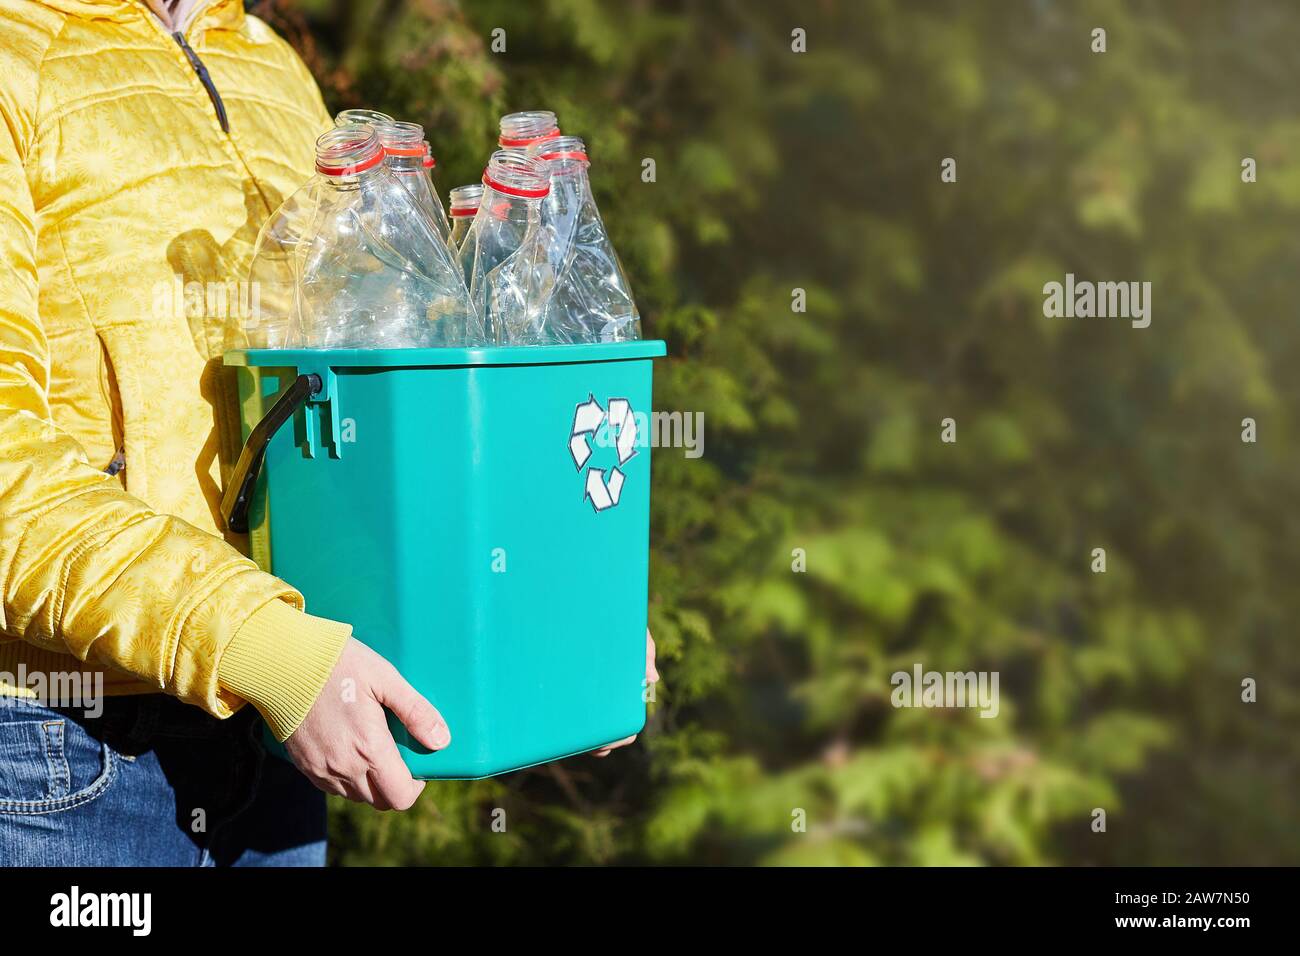 https://c8.alamy.com/comp/2AW7N50/save-the-world-plastic-free-girls-hands-hold-a-box-with-empty-plastic-bottles-sustainability-ecology-environmental-conservation-conceptual-image-f-2AW7N50.jpg